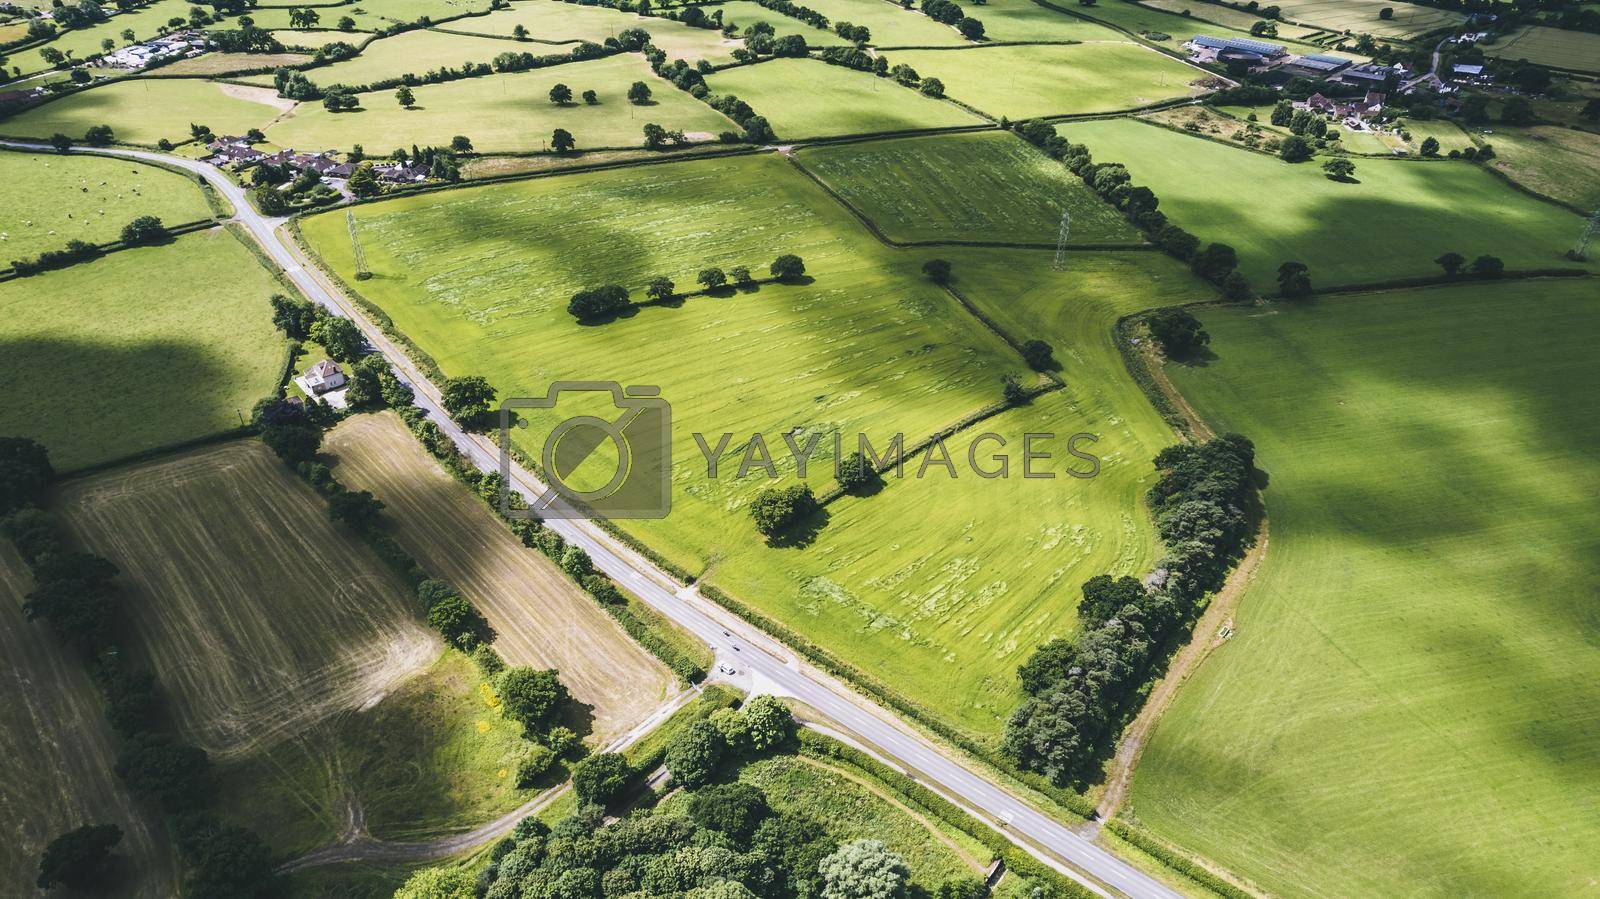 Chew Magna landscape from United Kingdom. High quality photo